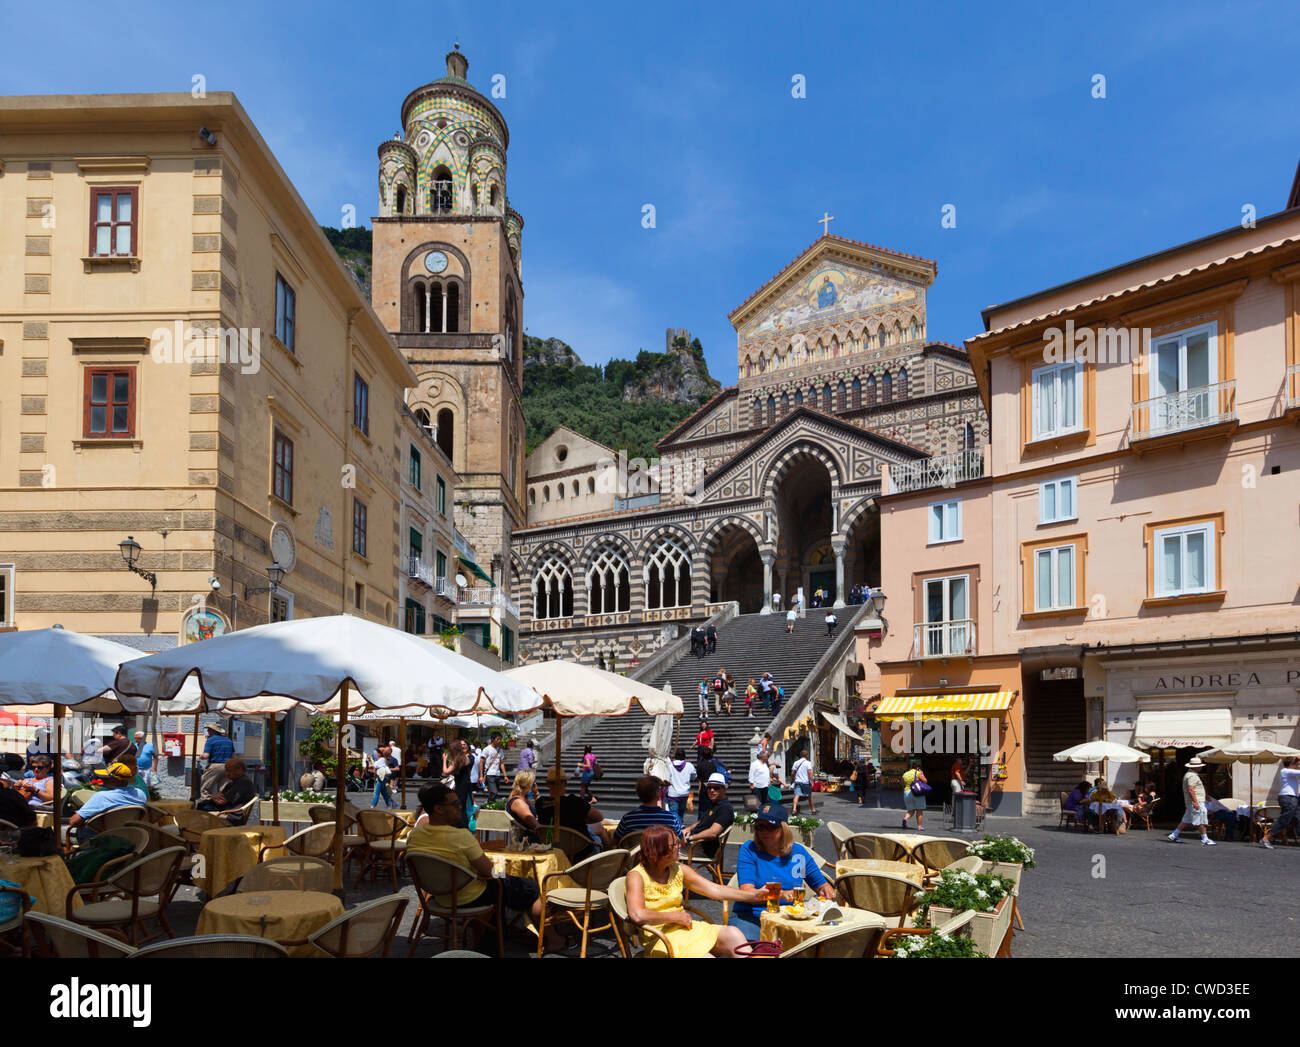 The Duomo and cafe in main square Stock Photo